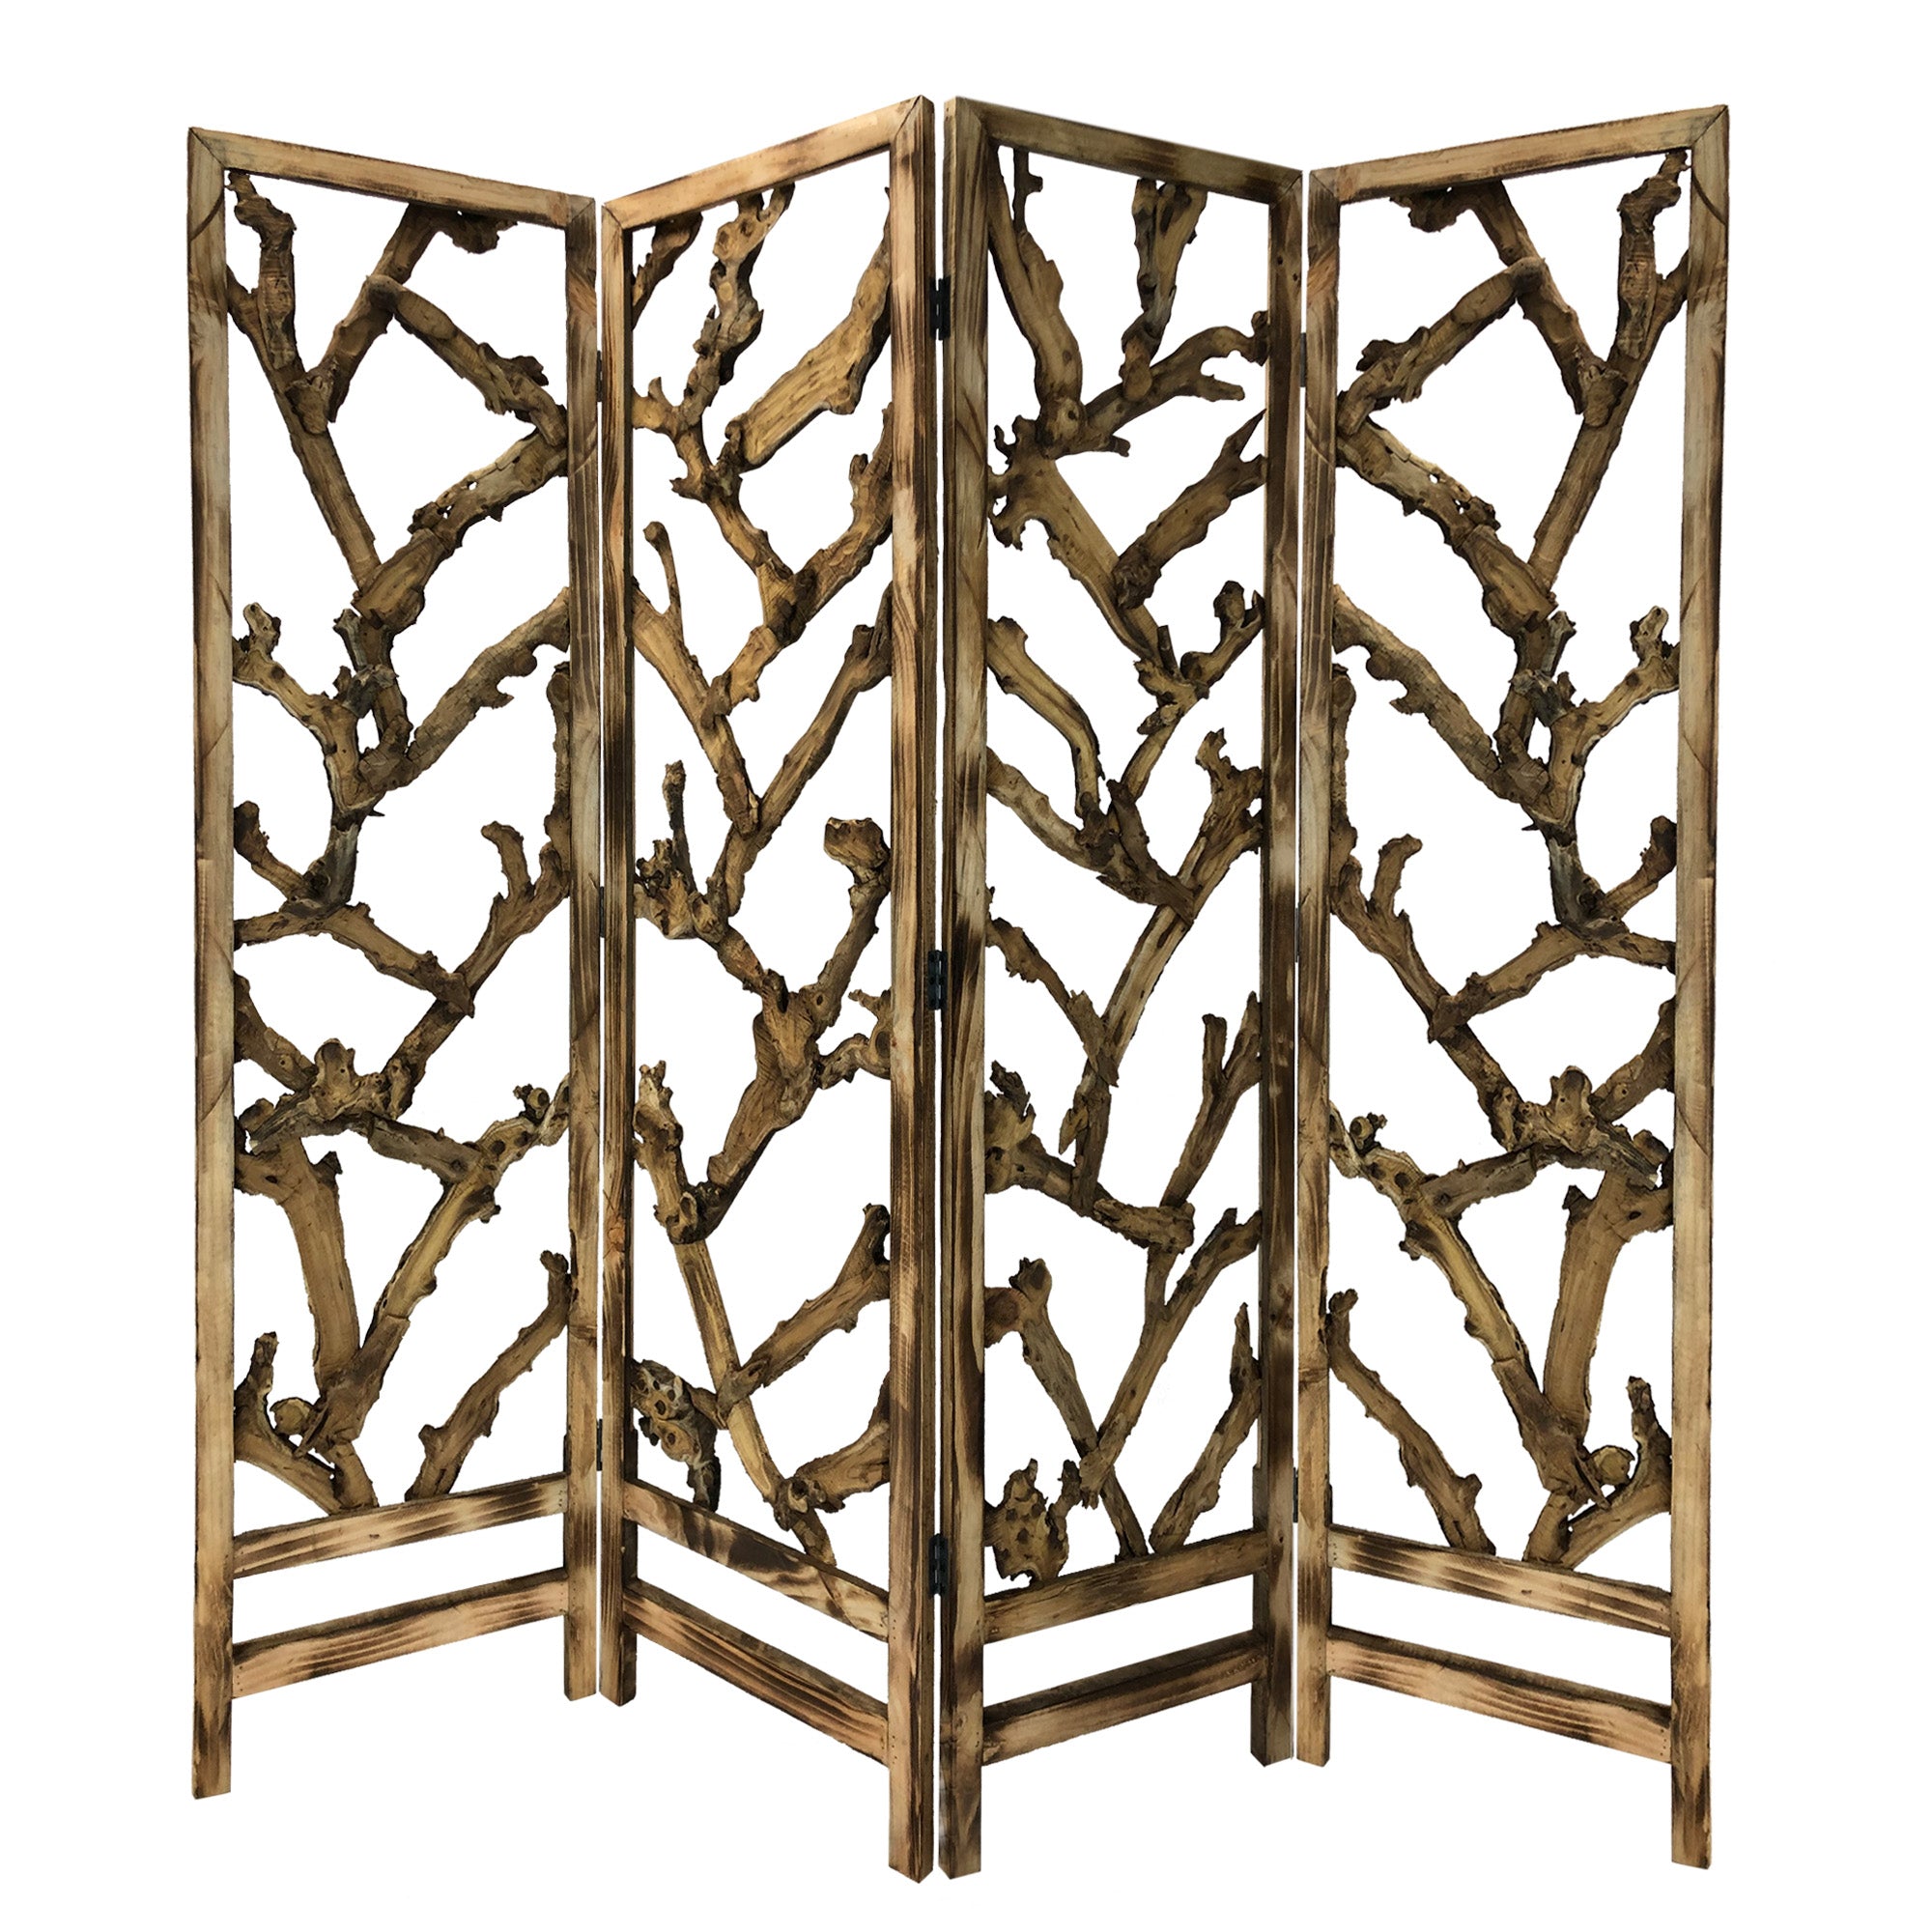 4 Panel Room Divider With Tropical Leaf